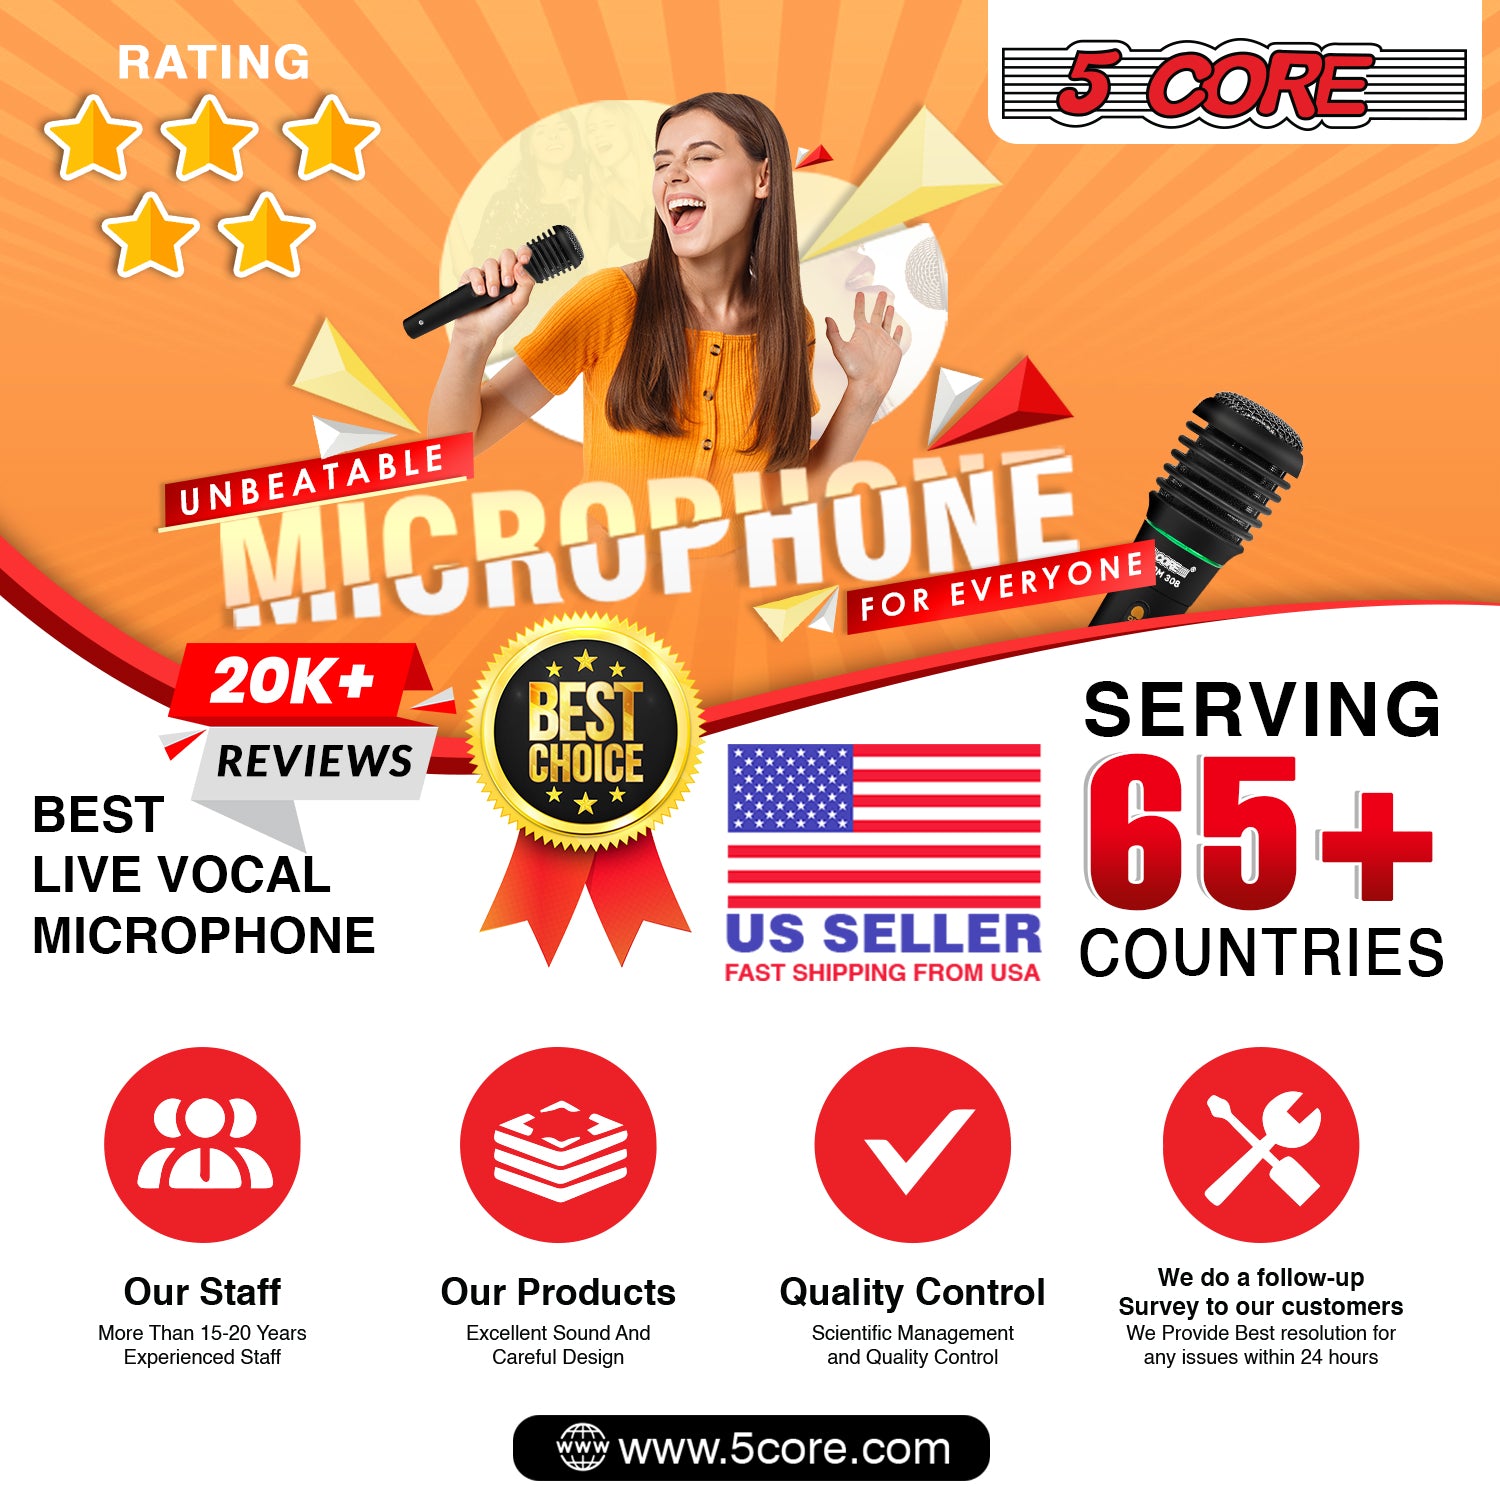 Professional Sound Quality: Unrivaled Performance with 5 Core Mic